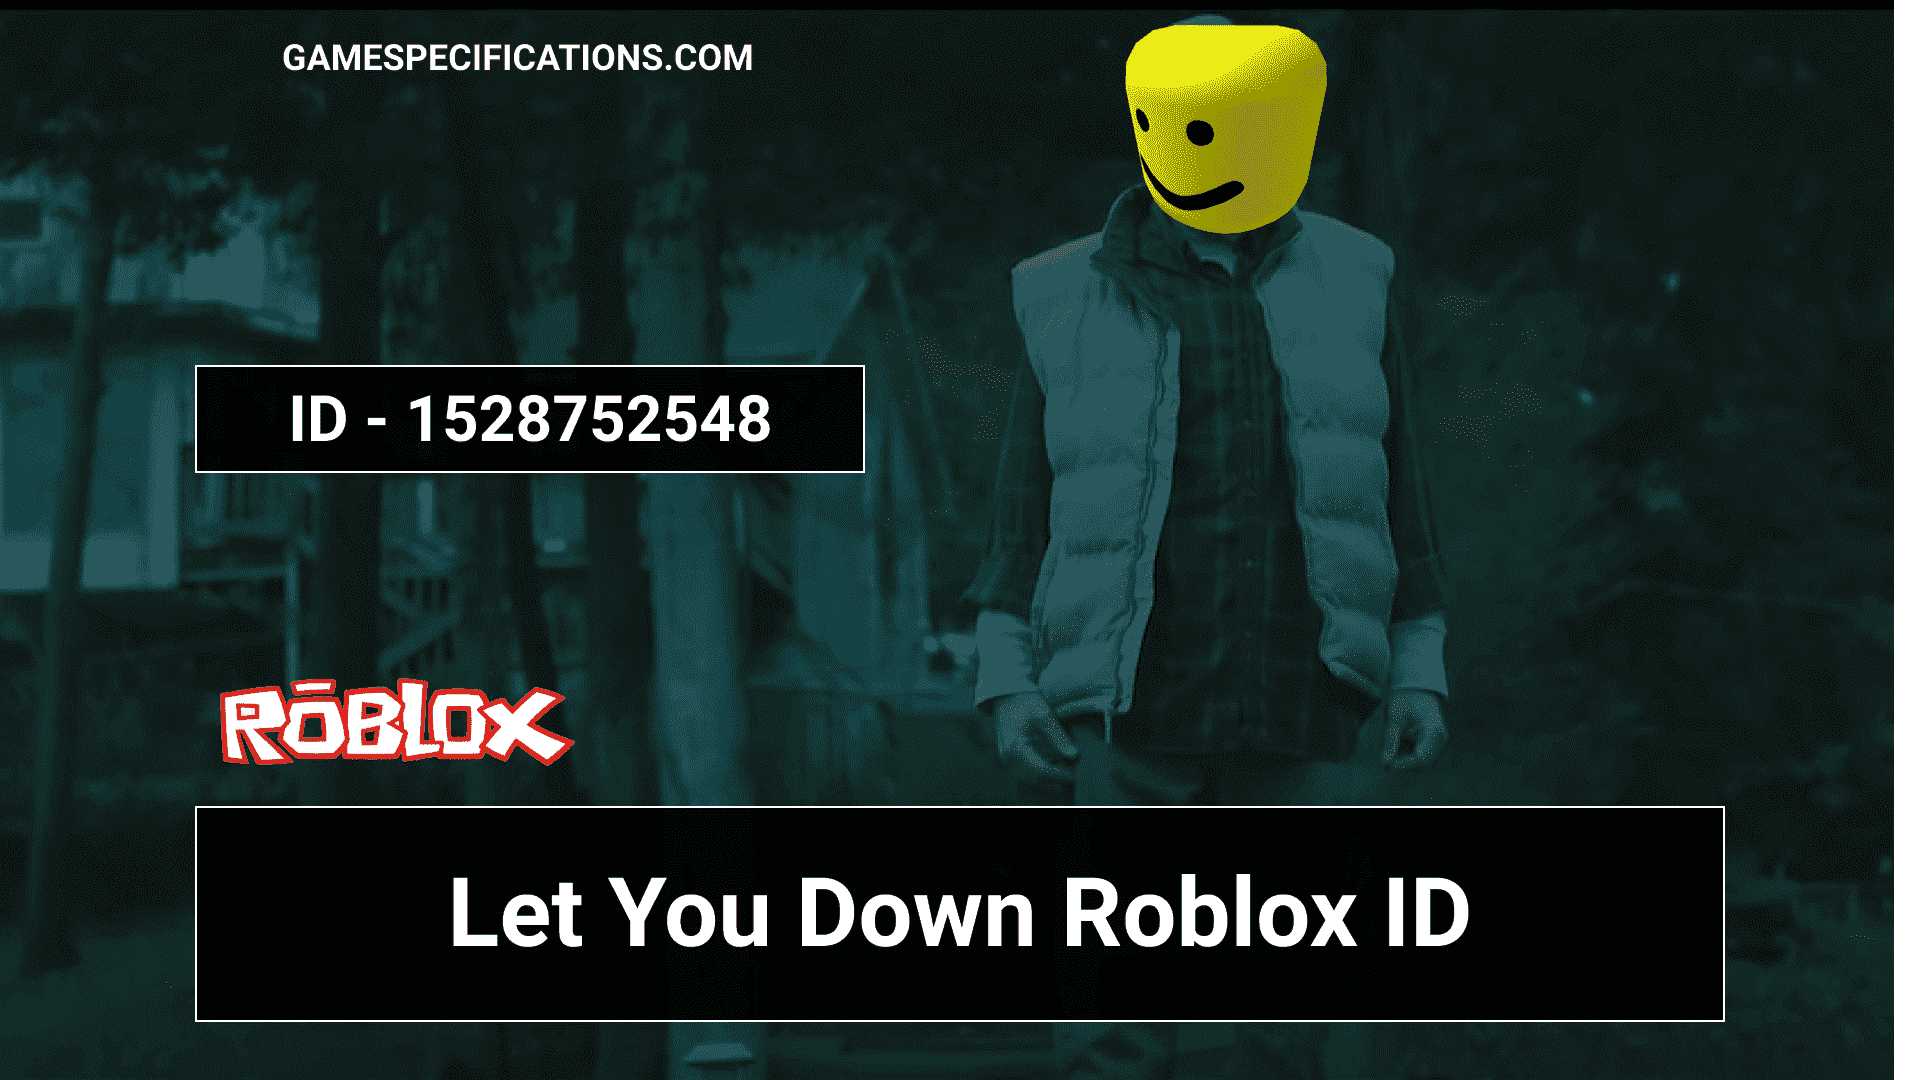 Let You Down Roblox Id Codes To Play The Nf Music 2021 Game Specifications - fnaf roblox id